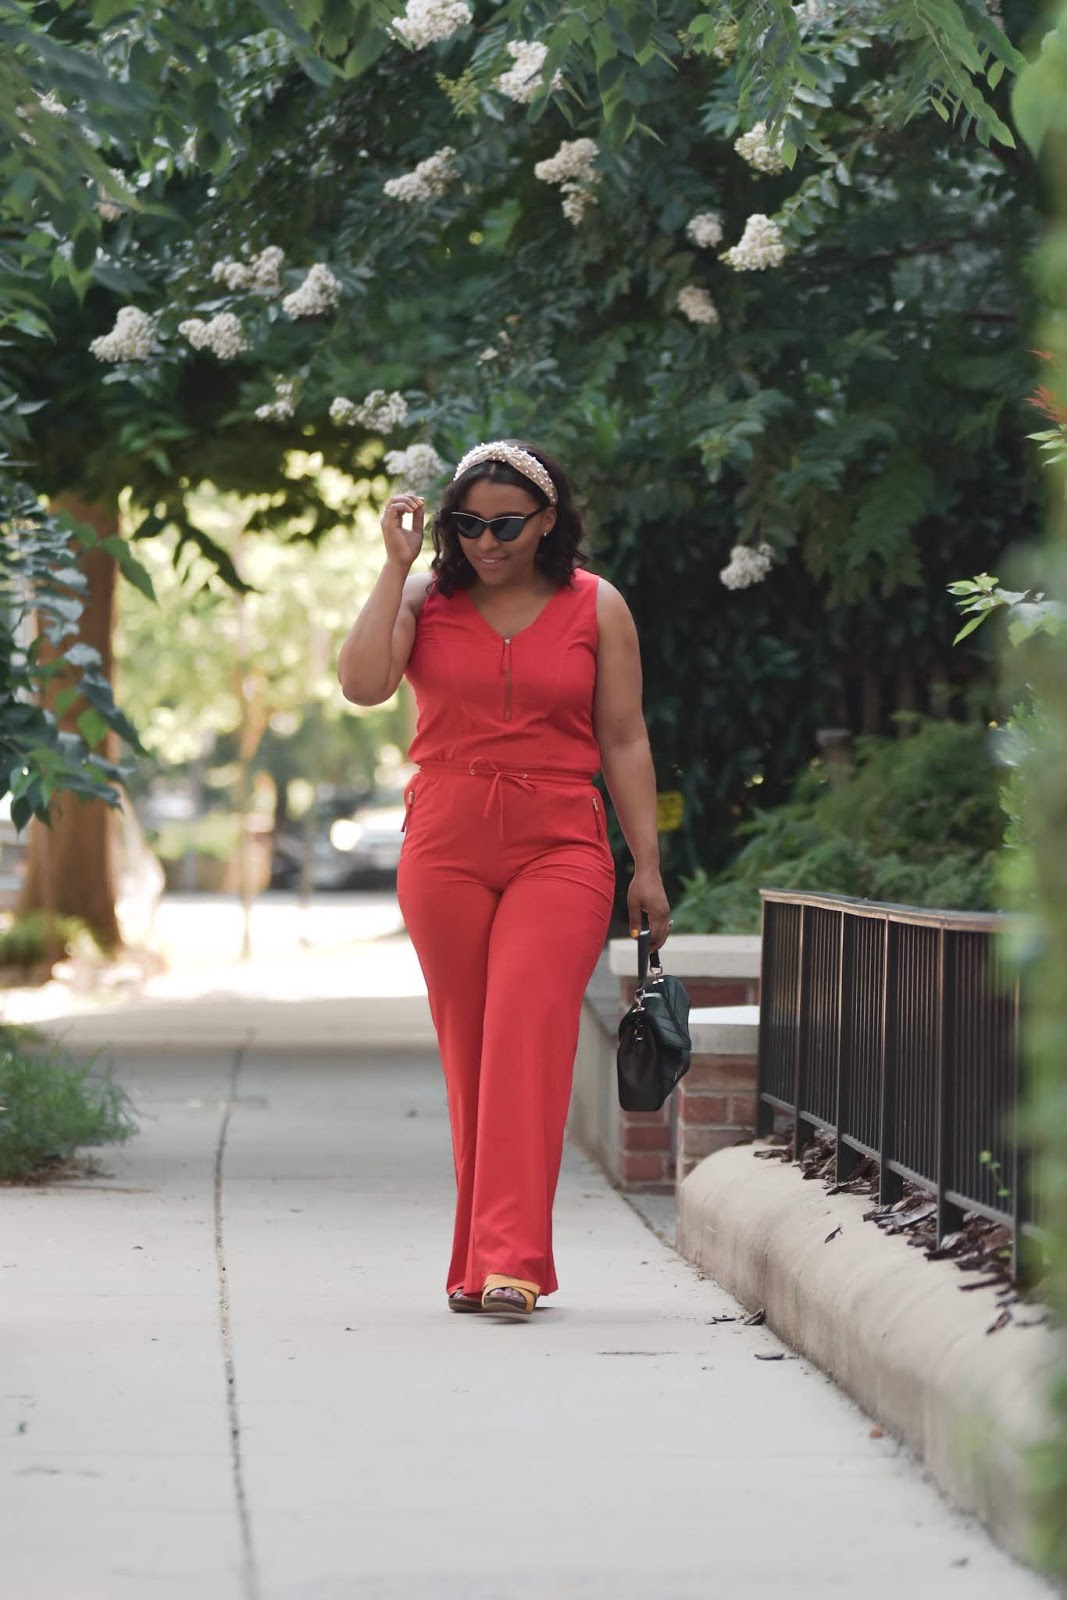 Red jumpsuit, urban decay, pearl headband, hair trends, patty's kloset, summer outfit ideas